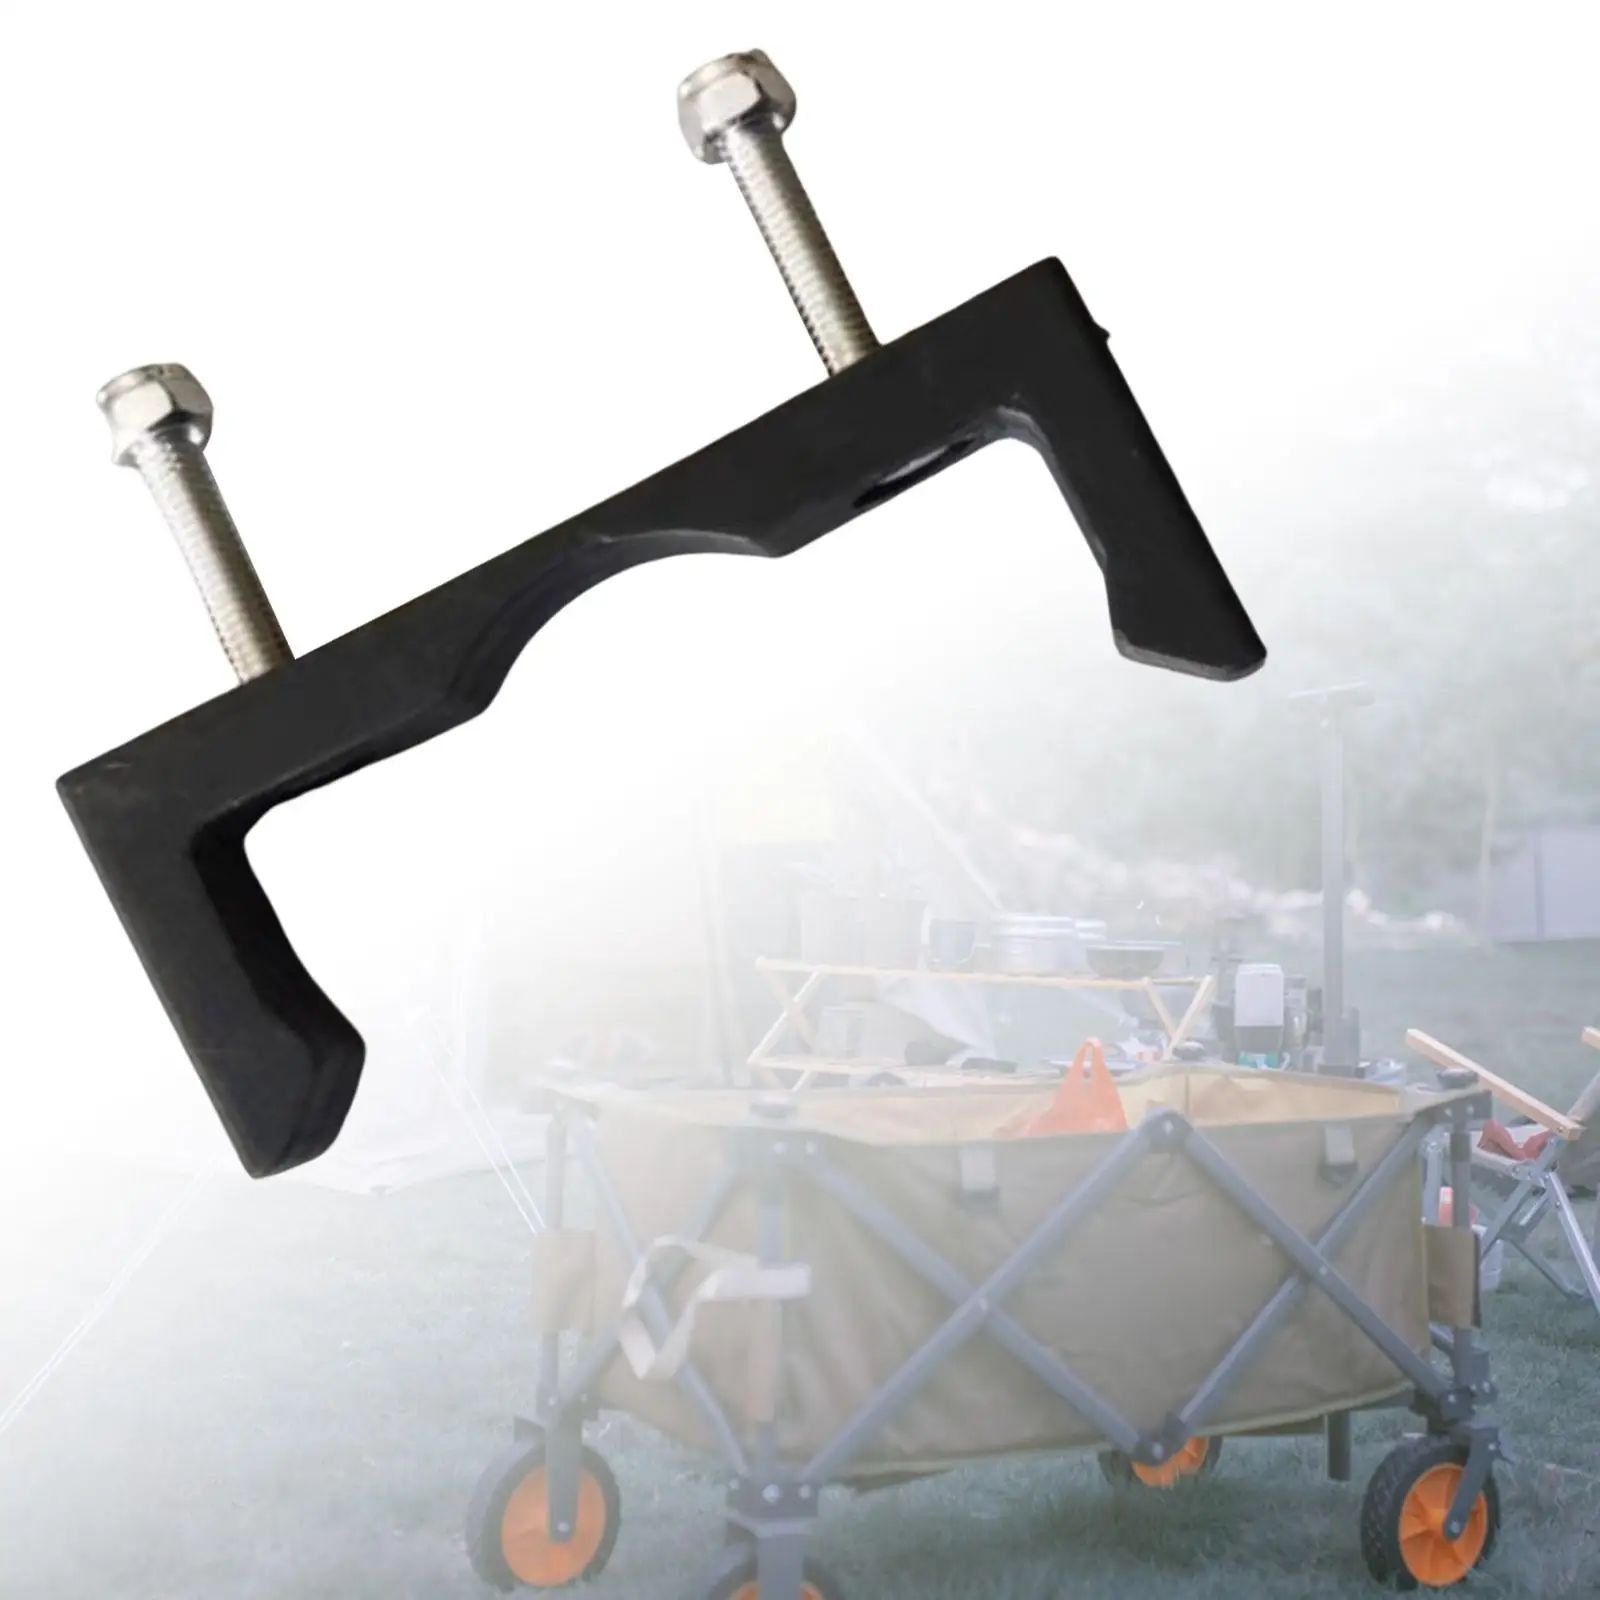 Folding Utility Wagon Pull Push Handle Fixed Buckle, Portable Fixing Buckle, for Fishing Camping Wagon Cart Accessory